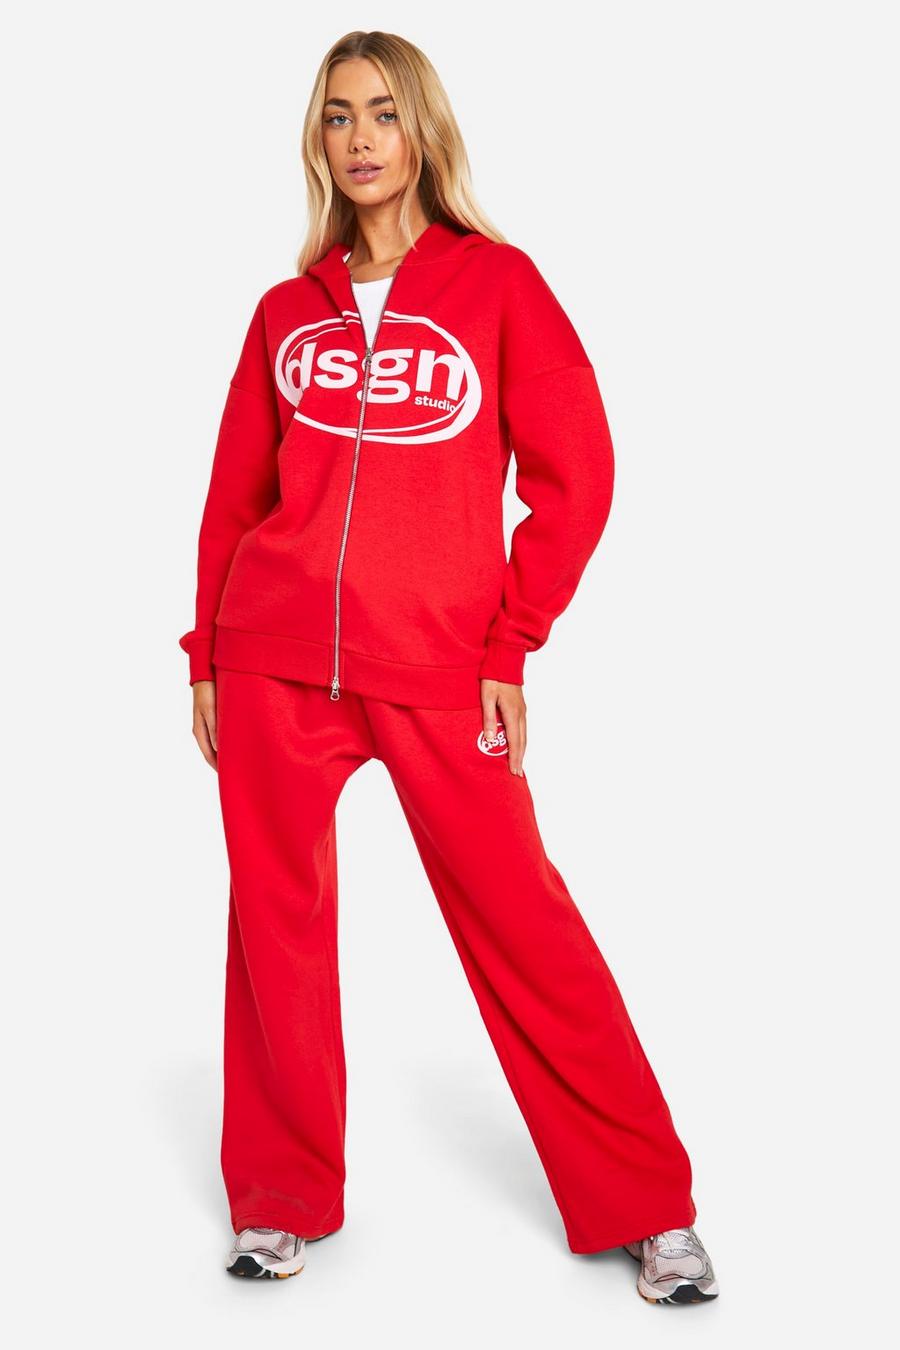 Red Dsgn Studio Oval Print Cuffed Oversized Sweatpant image number 1